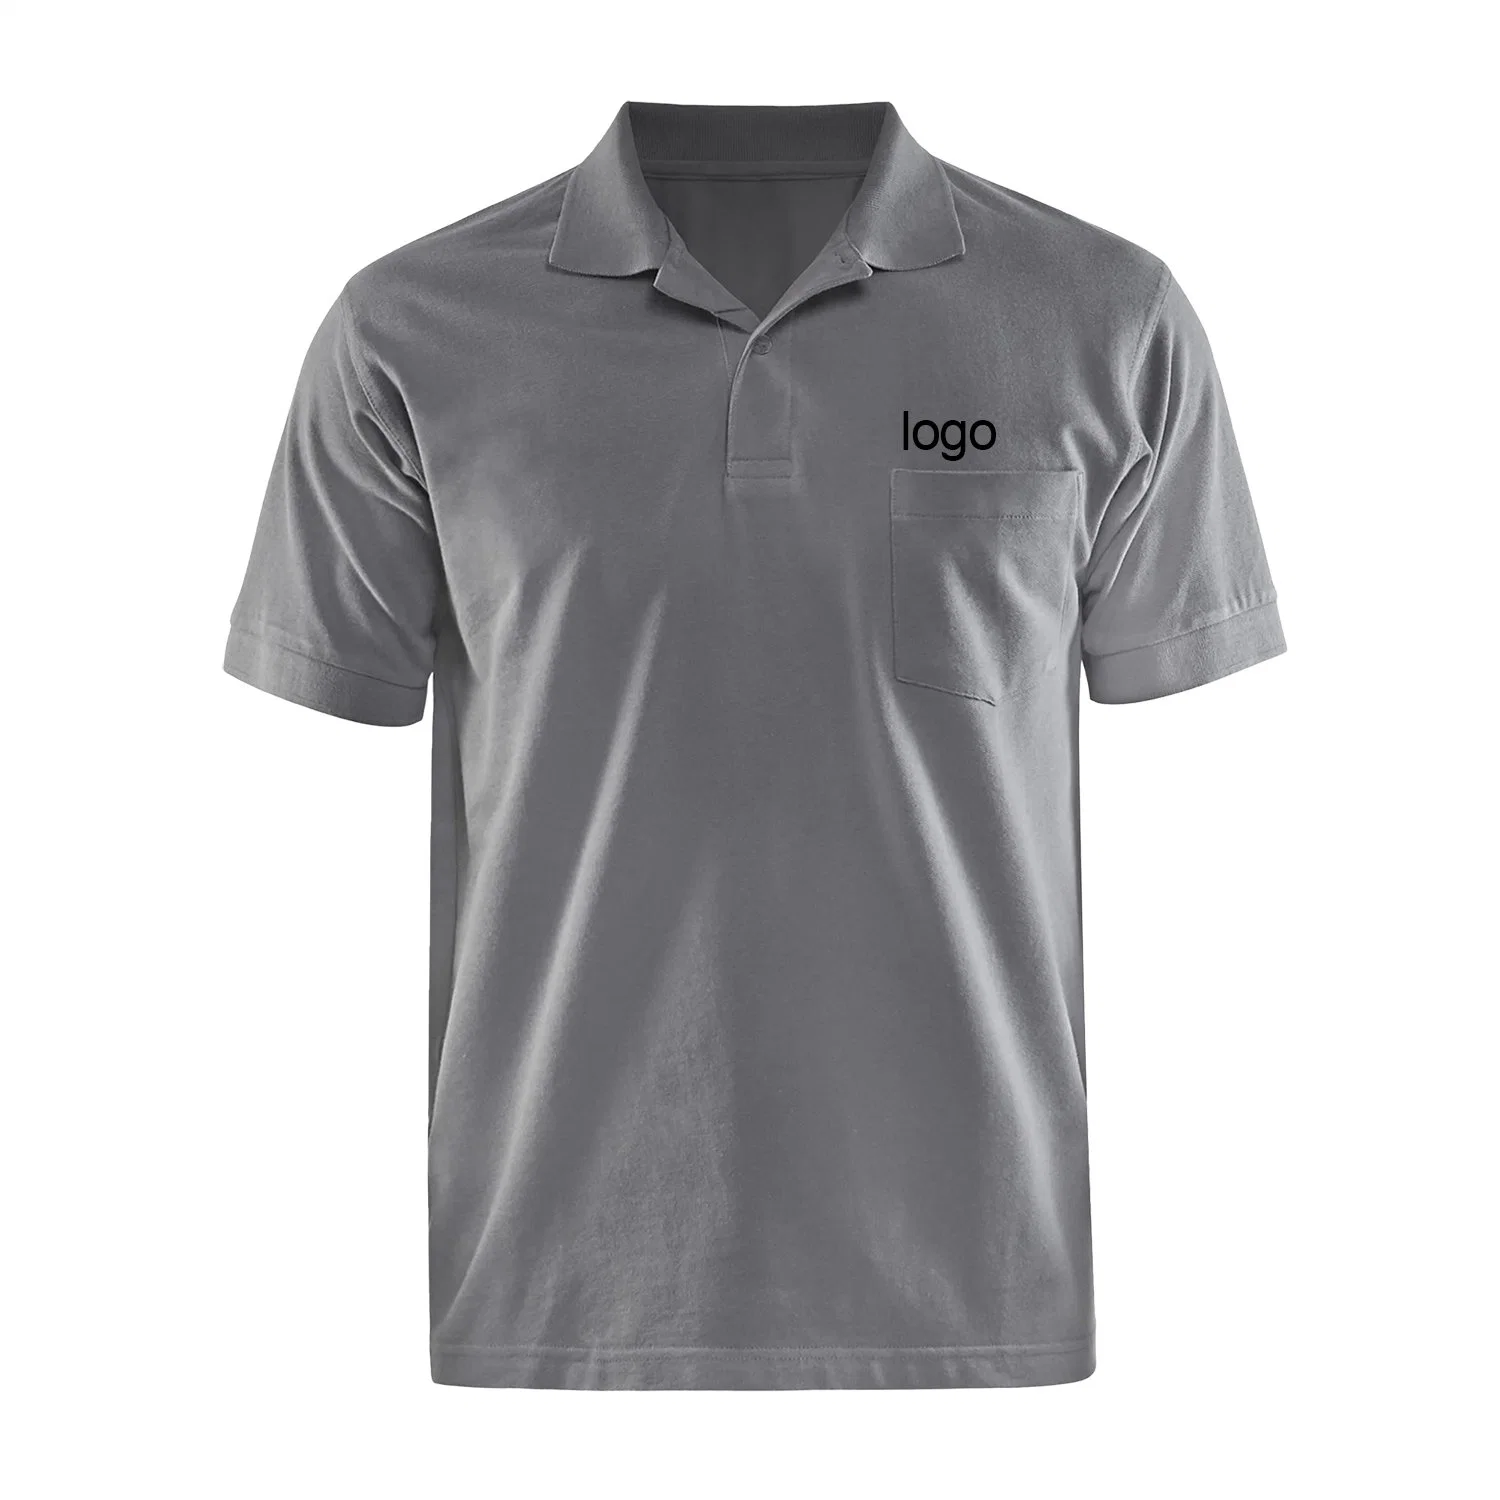 OEM/ODM High Quality Male Sport Golf Shirts Factory Direct Sale Men's Long-Sleeved Polo Shirt